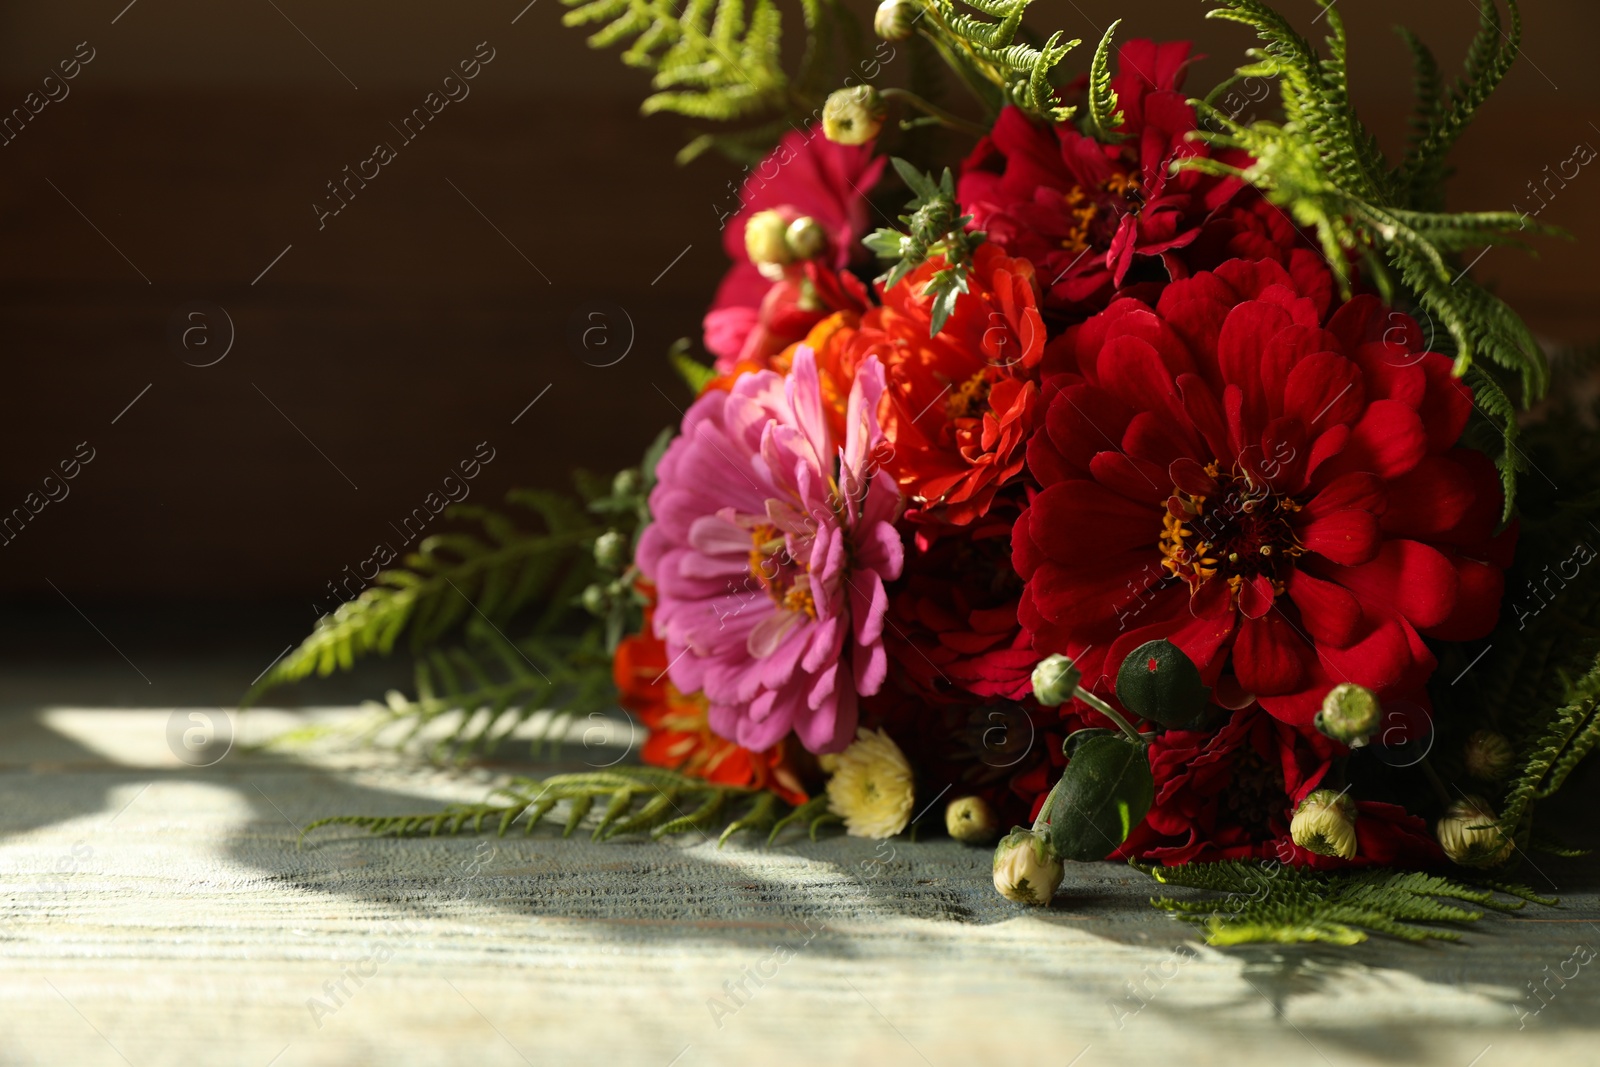 Photo of Bouquet of beautiful wild flowers on wooden rustic table against dark background. Space for text